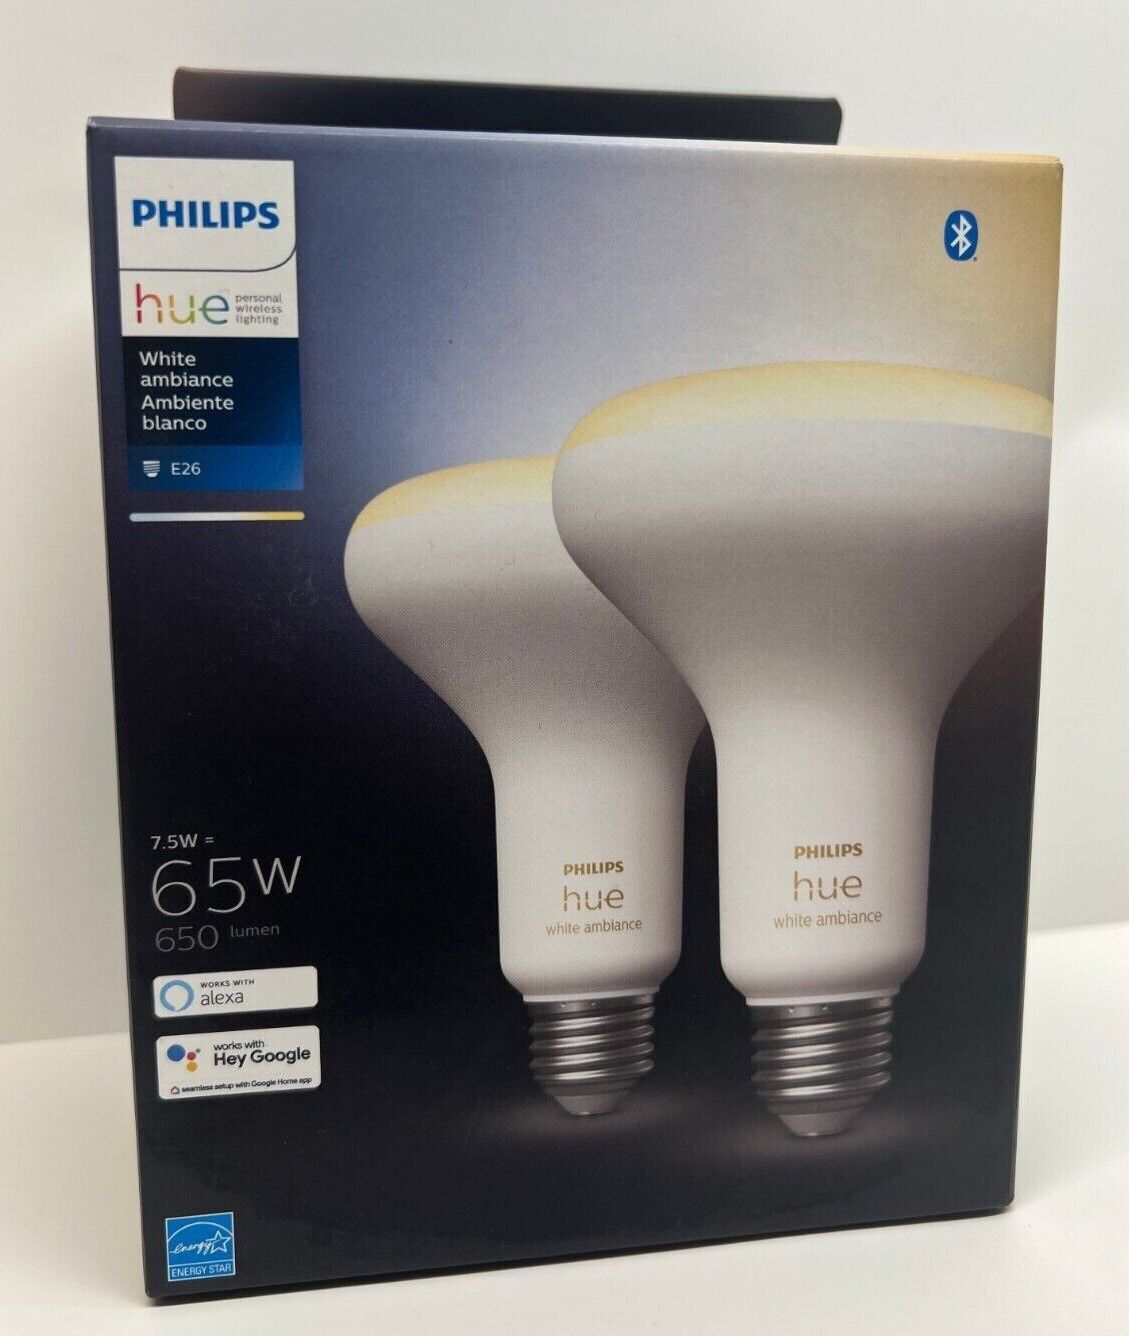 Philips Hue White Ambiance BR30 LED 65-Watt Equivalent Dimmable Light Bulb- 2